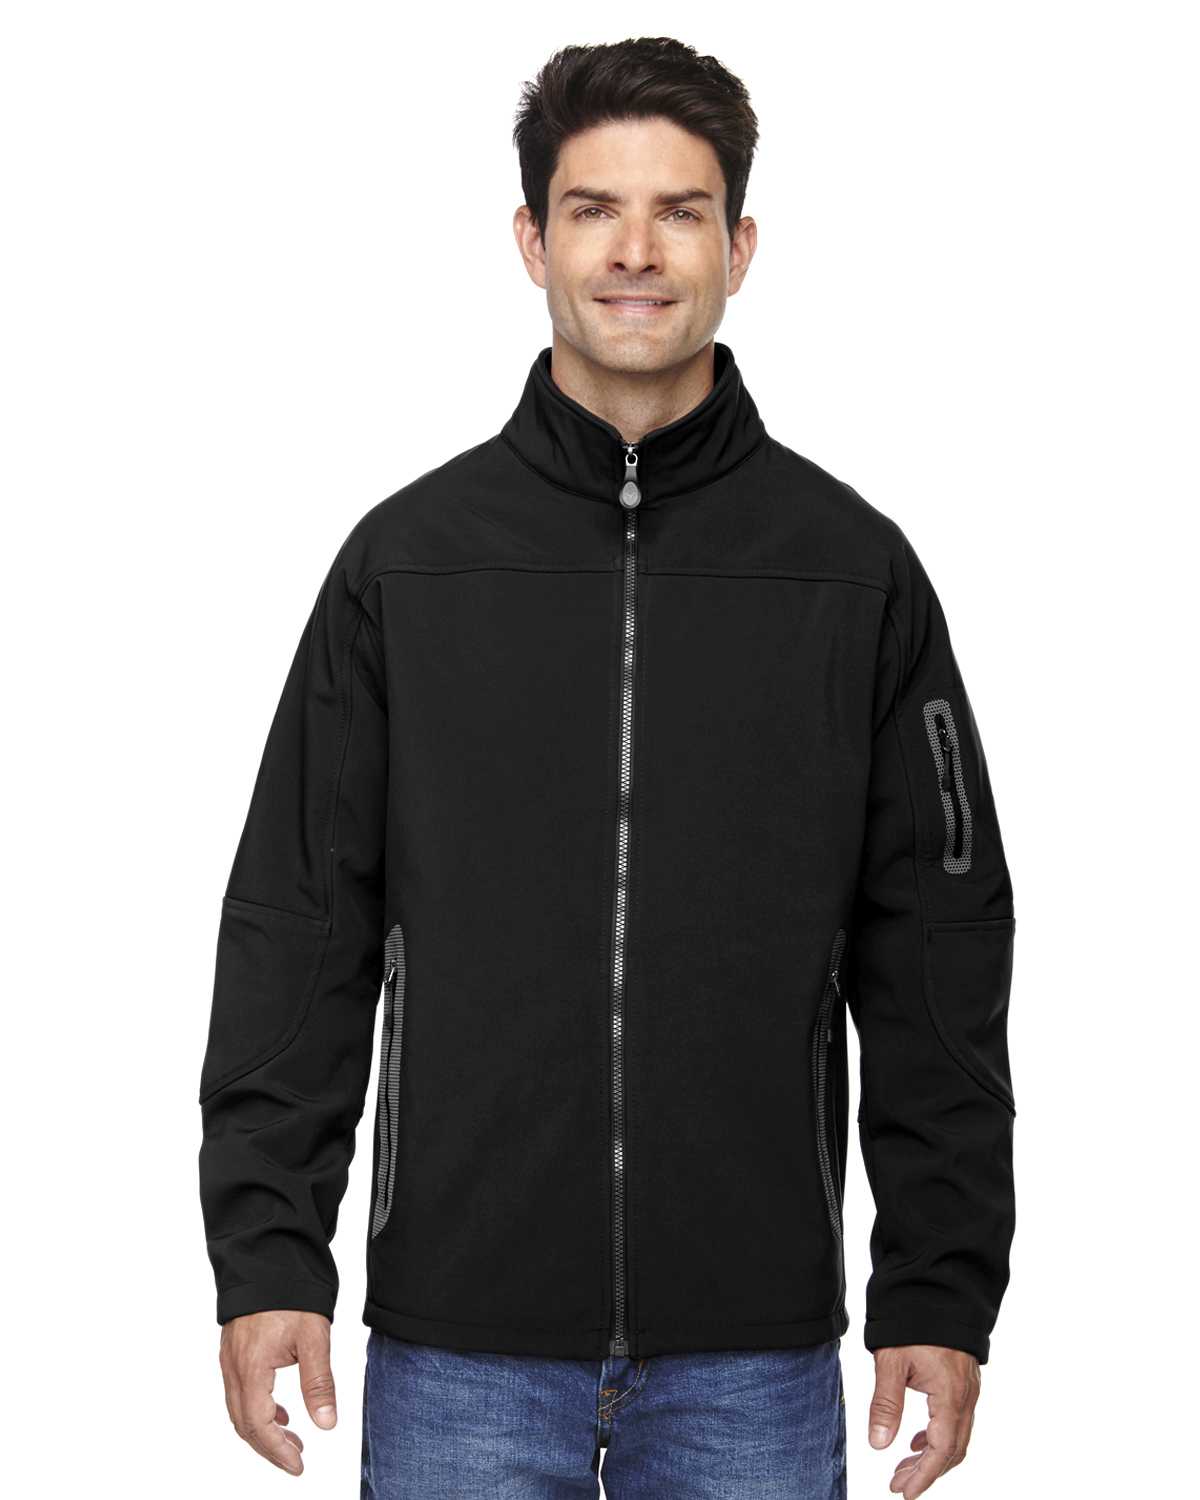 North End 88138 Men's Three-Layer Fleece Bonded Soft Shell Technical ...